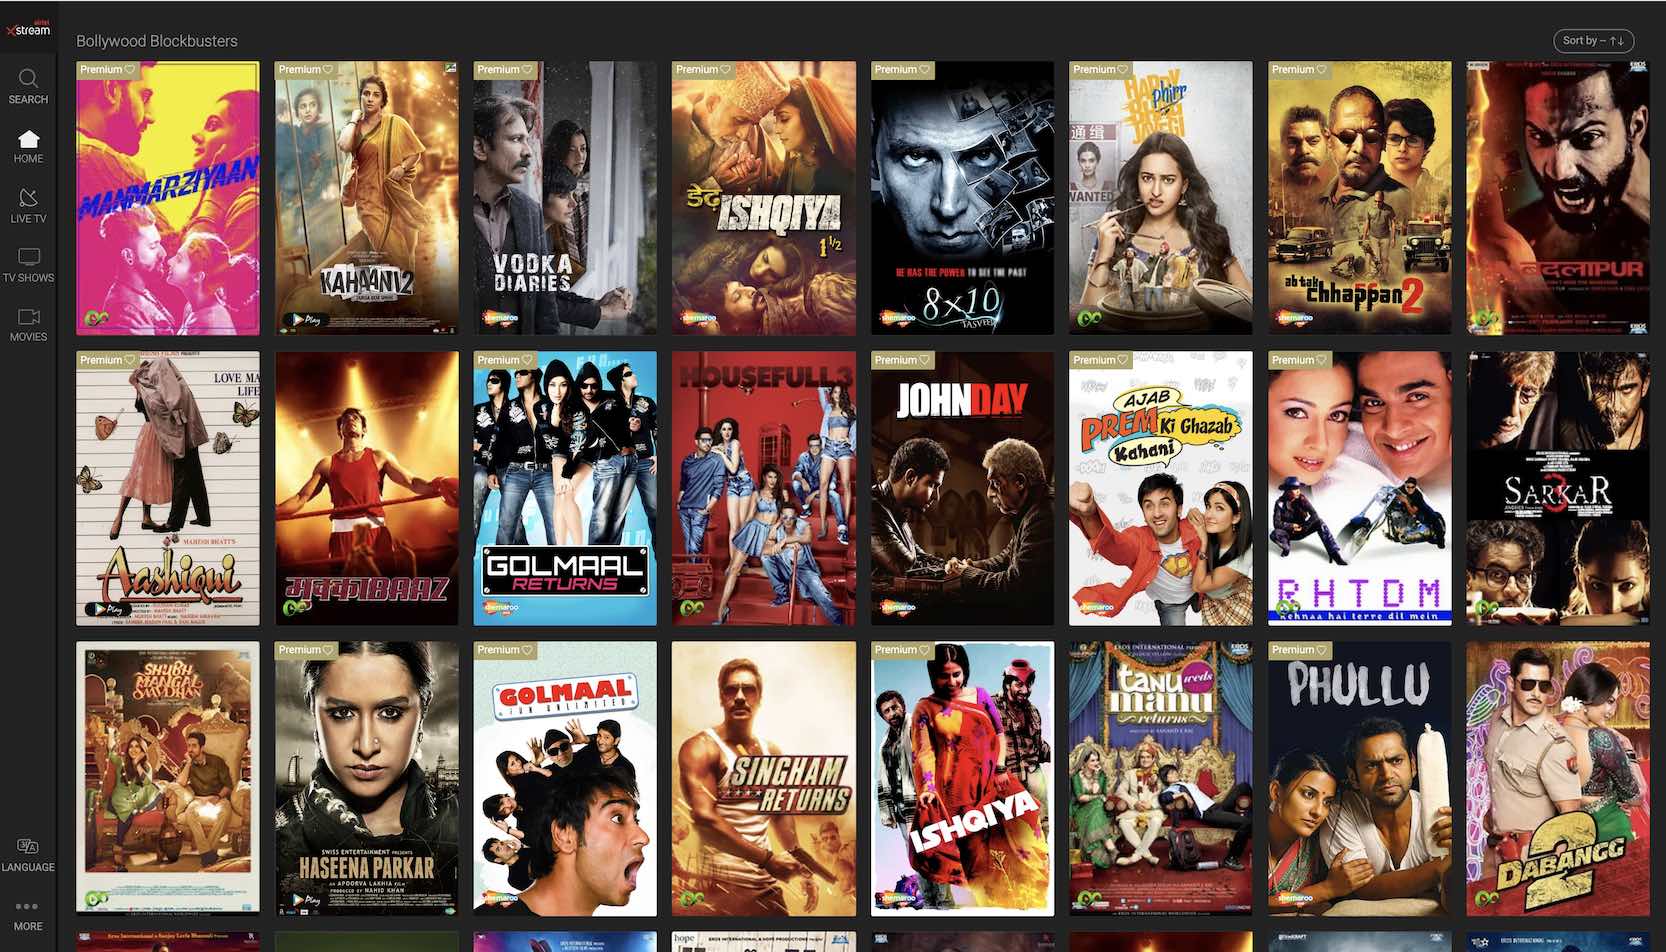 13 Best Free Sites To Watch Hindi Movies Online Legally In 2020